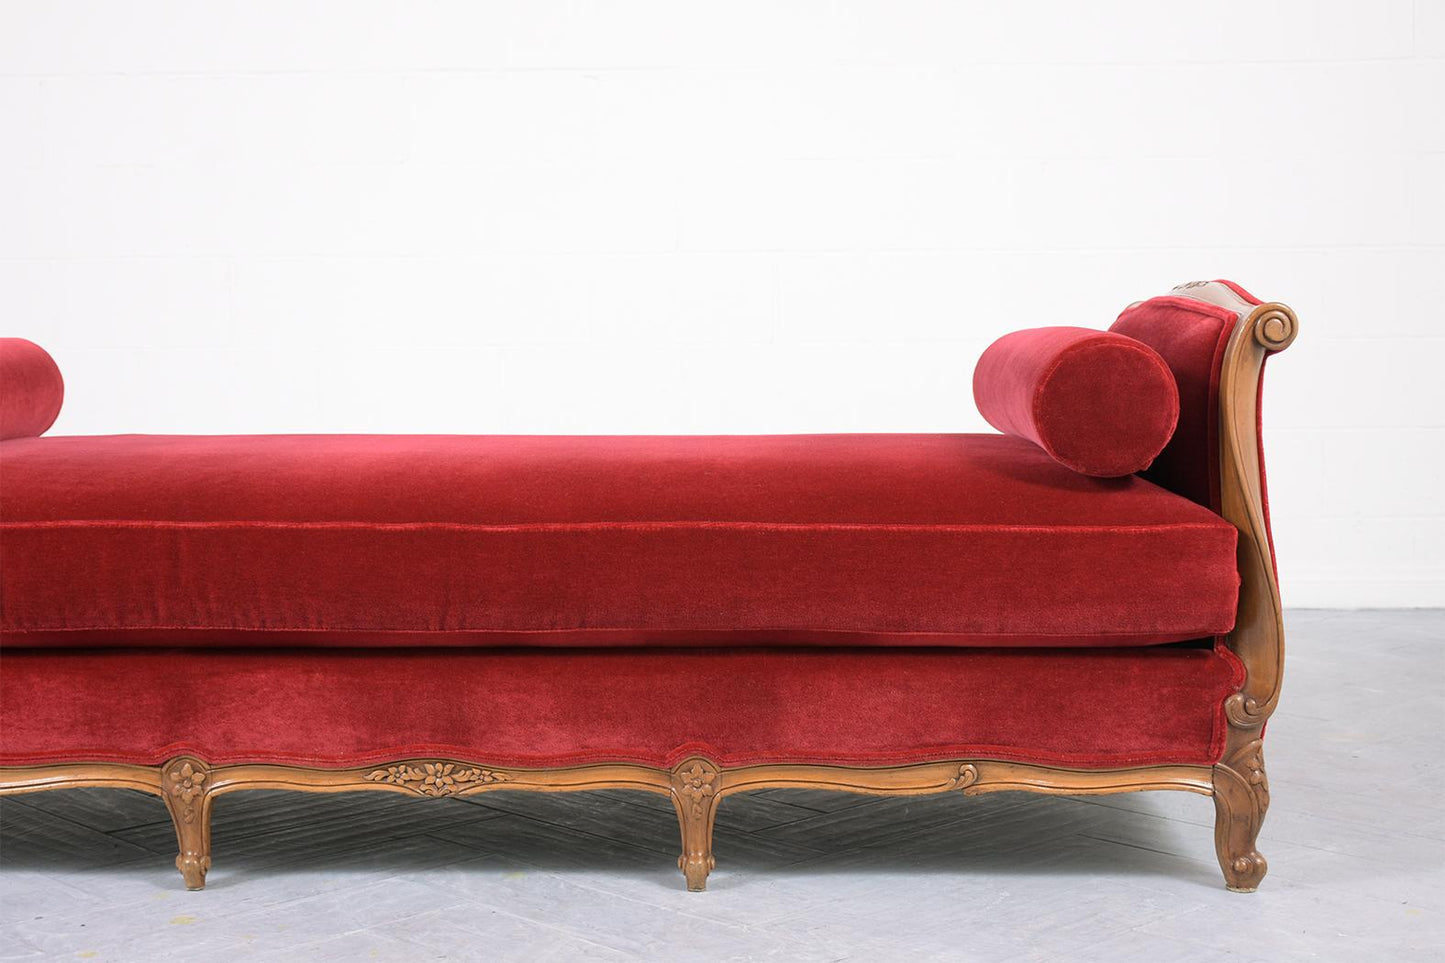 Antique Upholstered Daybed